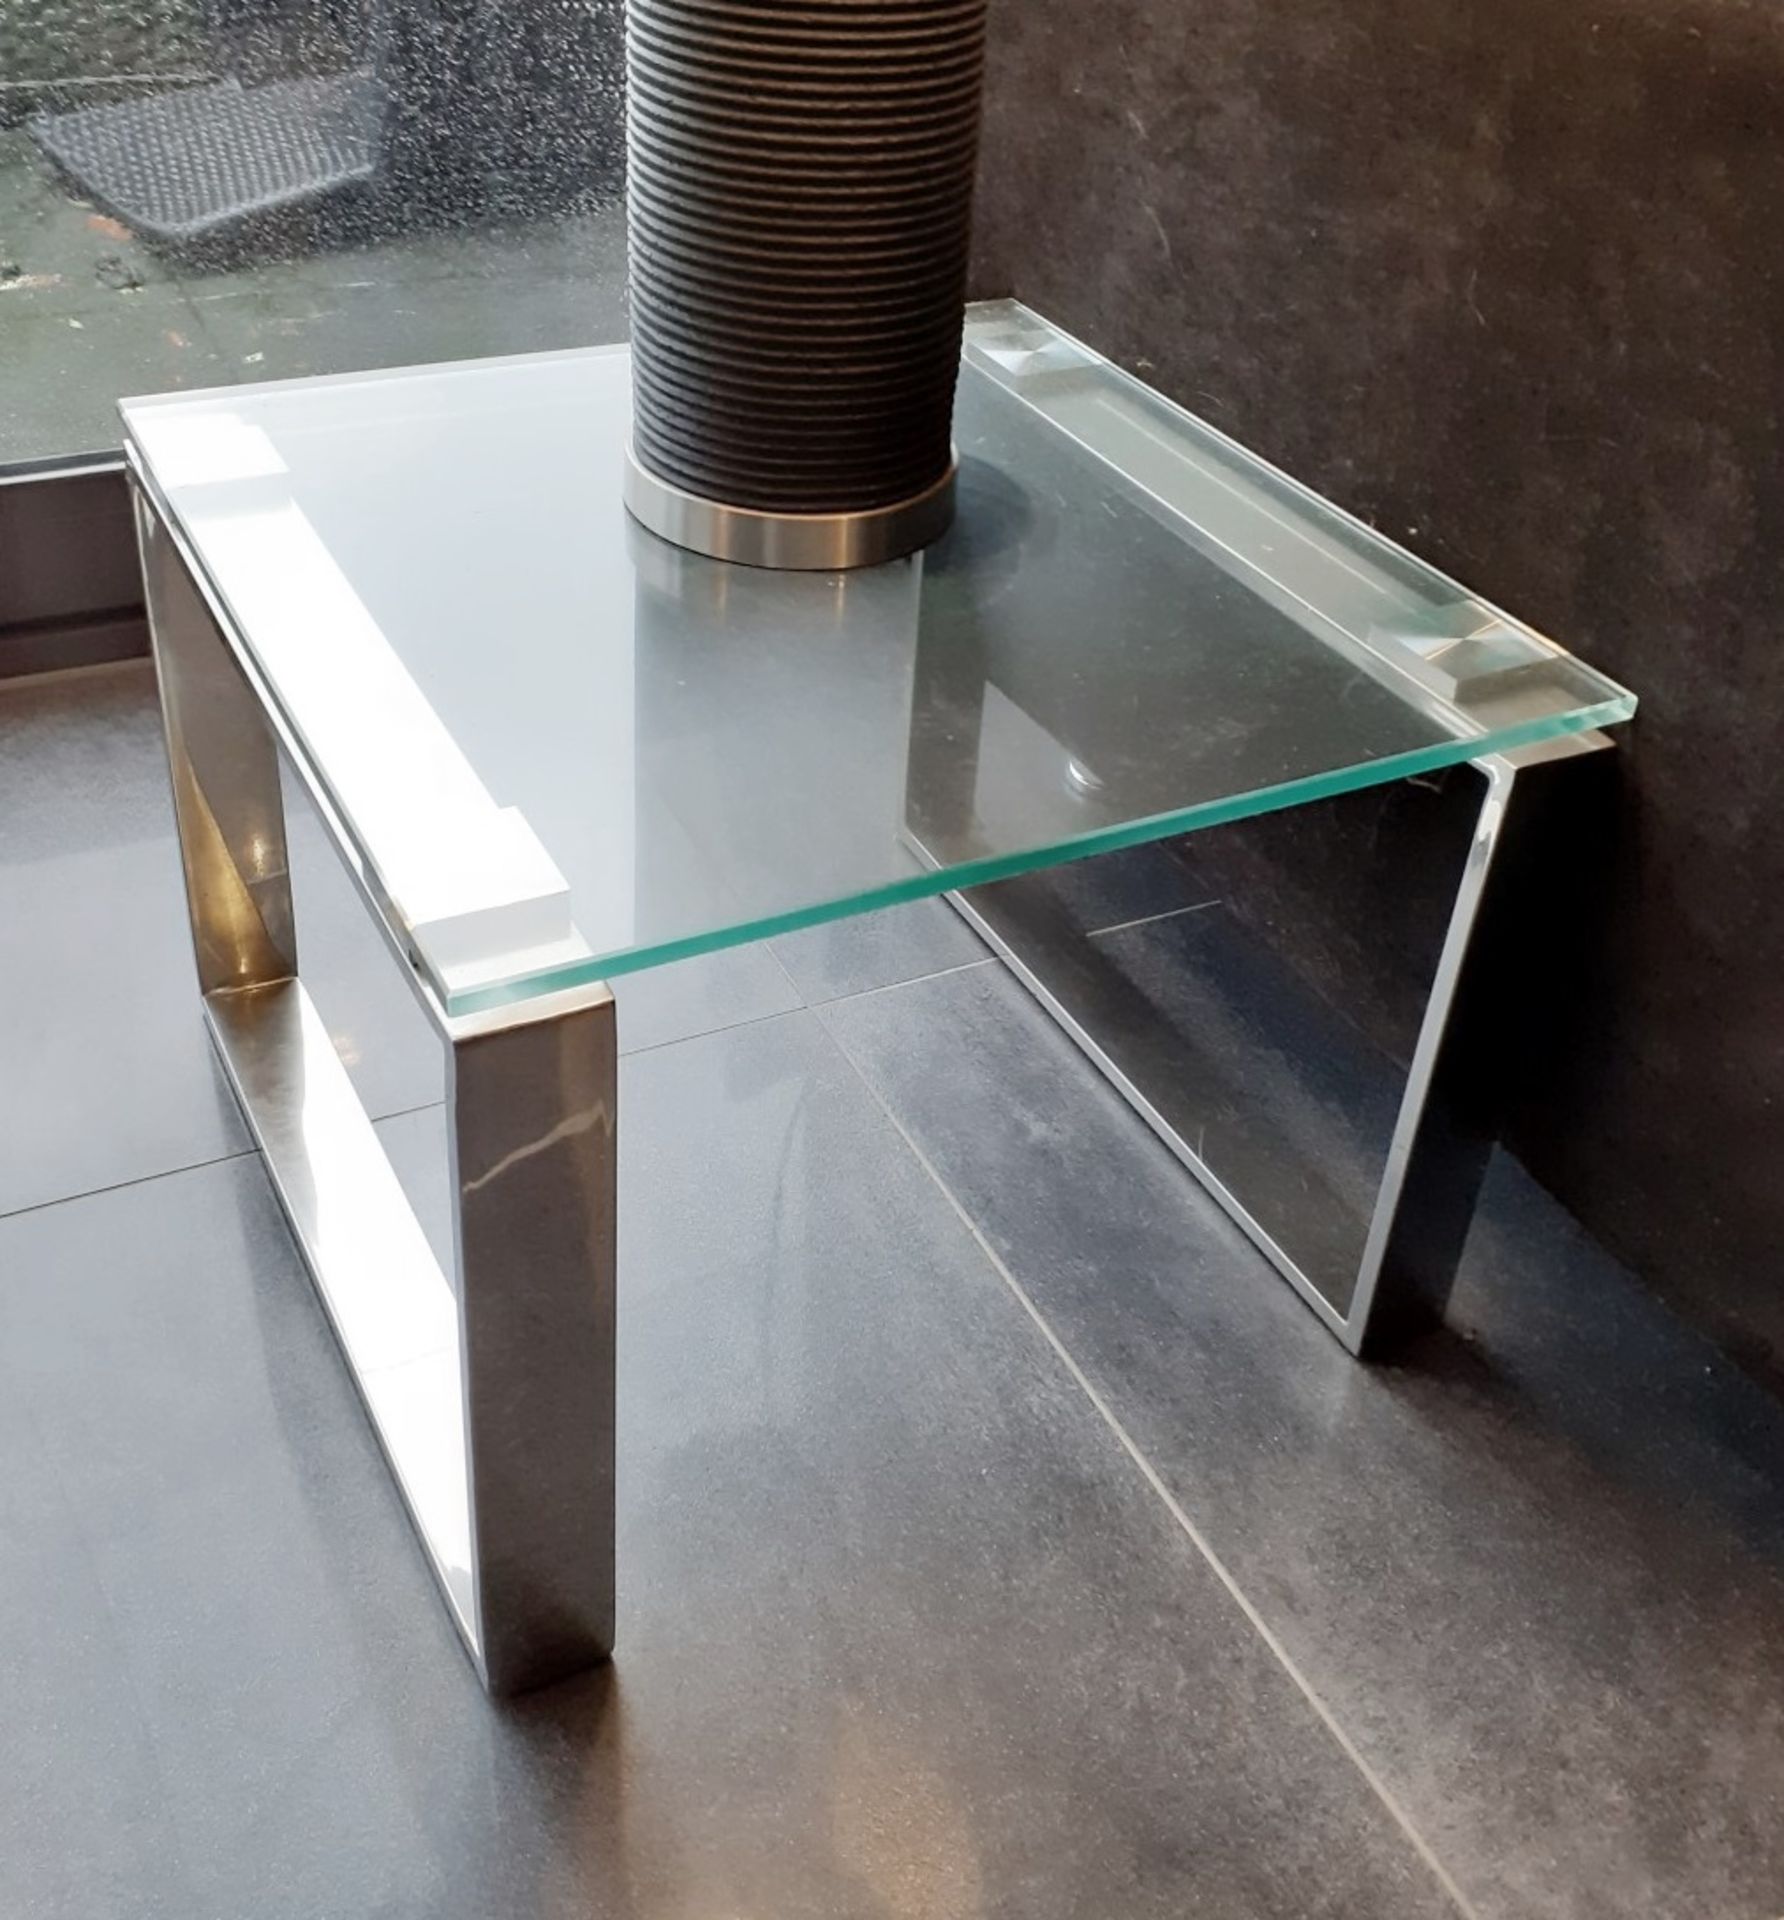 1 x Glass Topped Lamp Table With A Chromed Base - Dimensions: 45 x 45 x H34cm - Preowned - NO VAT